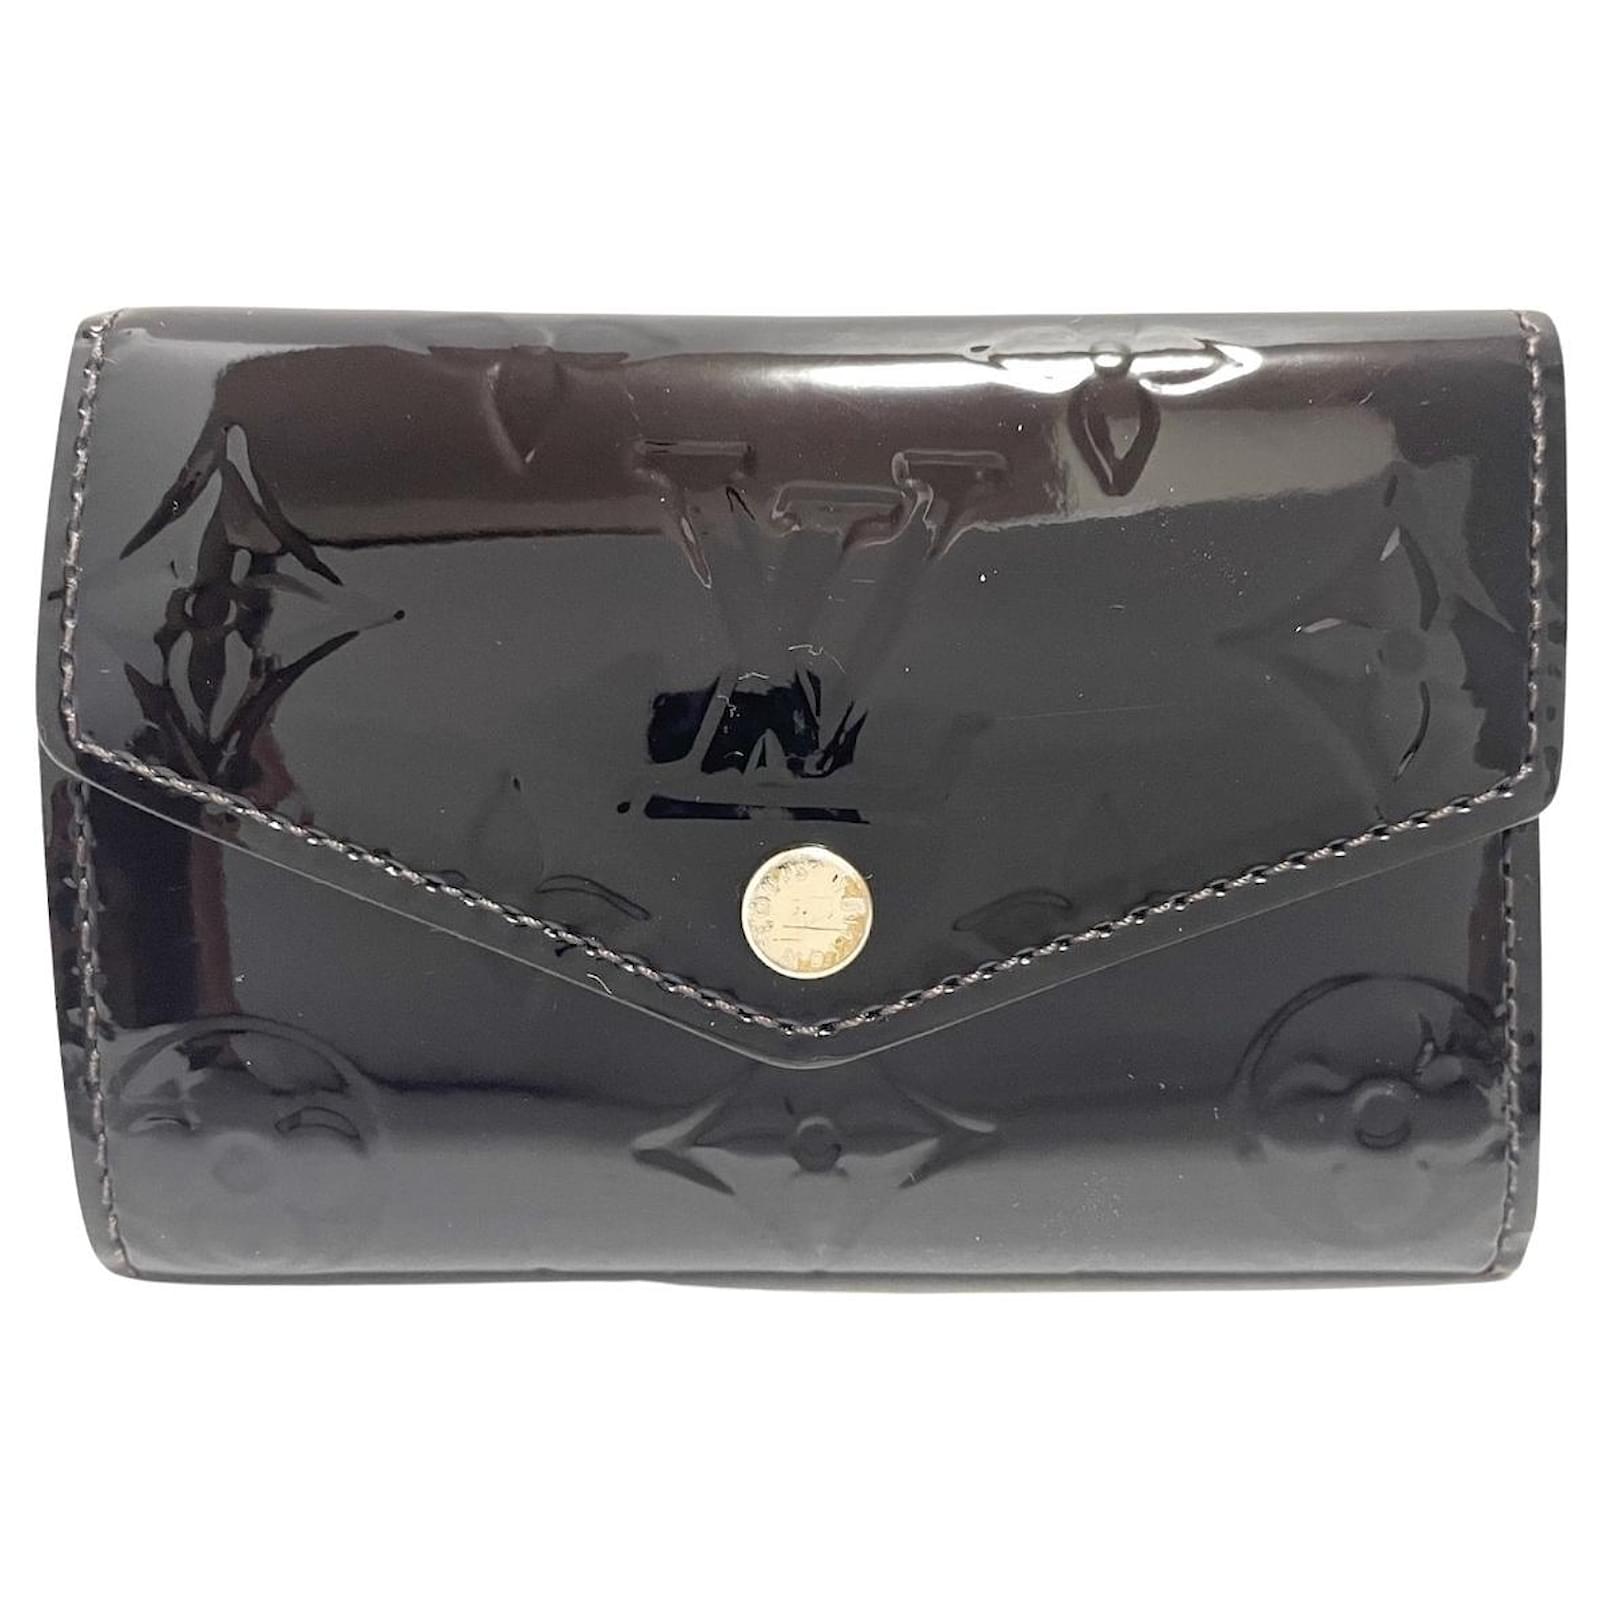 Key pouch patent leather small bag Louis Vuitton Black in Patent